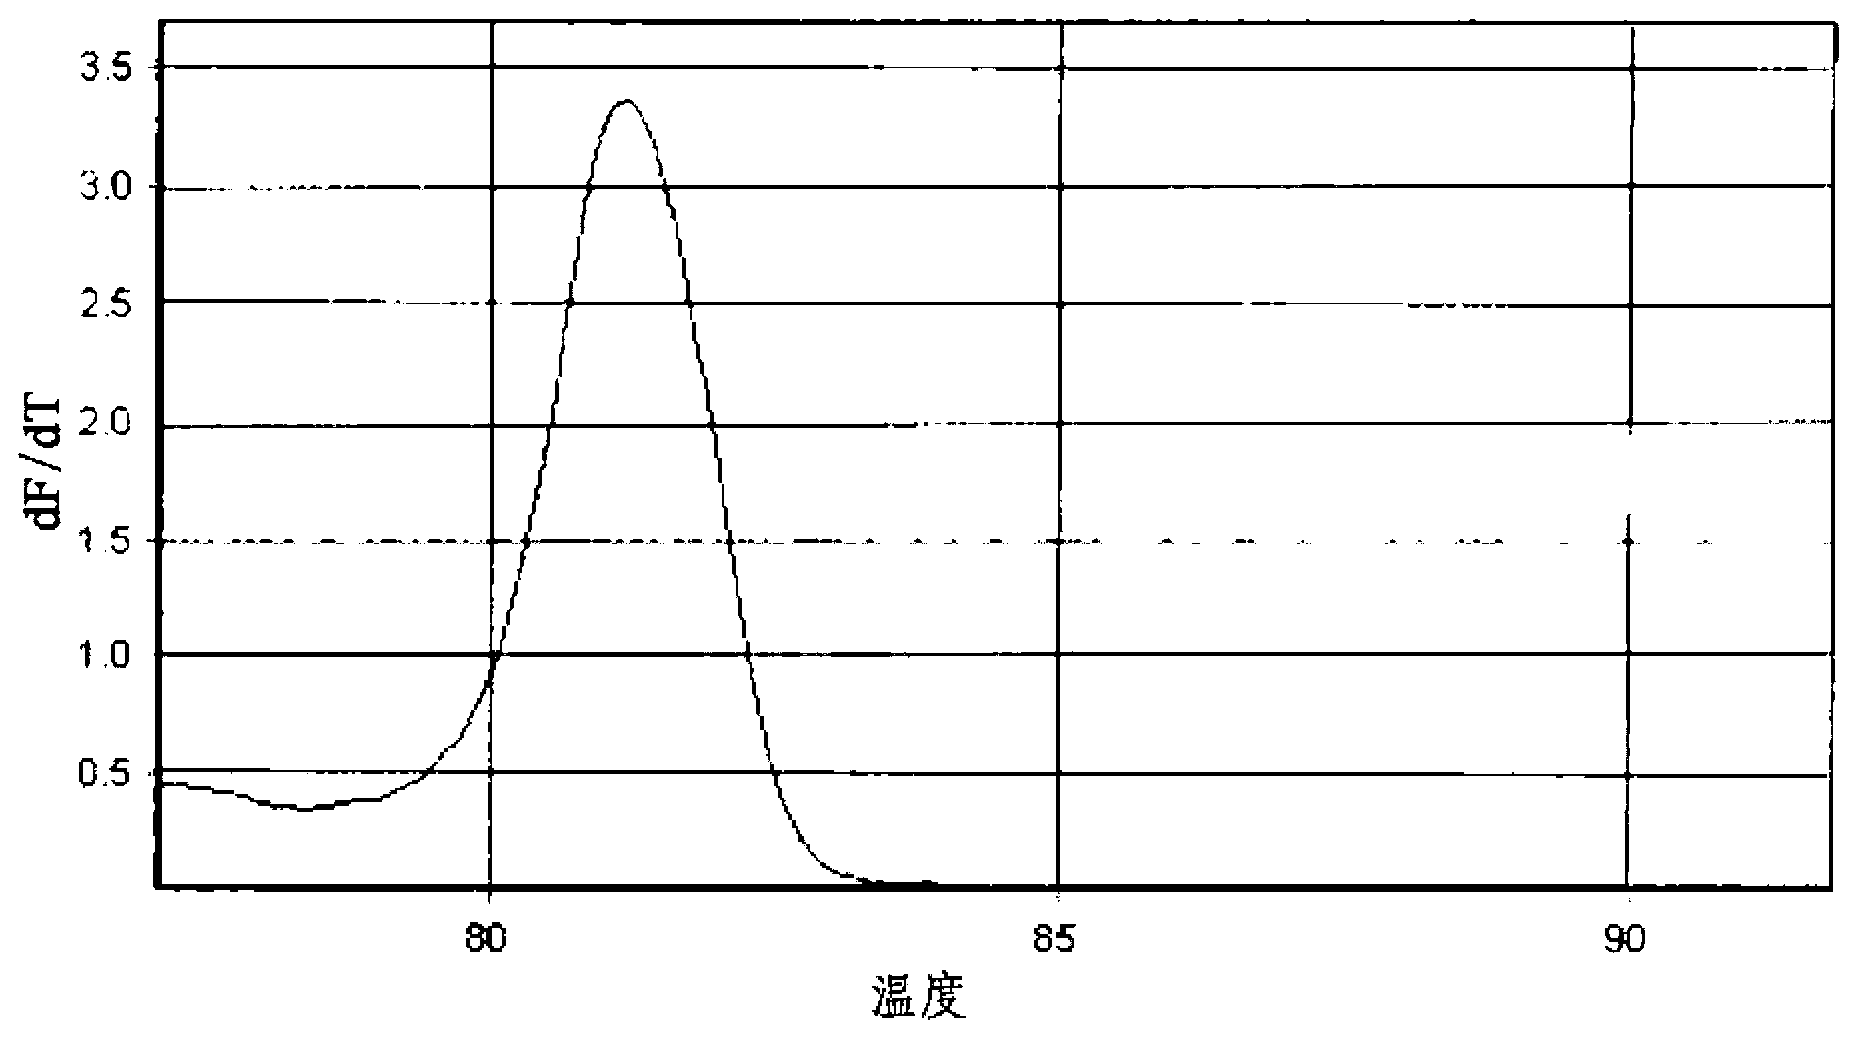 Method for detecting mycobacterium tuberculosis and nontuberculous mycobacteria using duplex real-time polymerase chain reaction and melting curve analysis